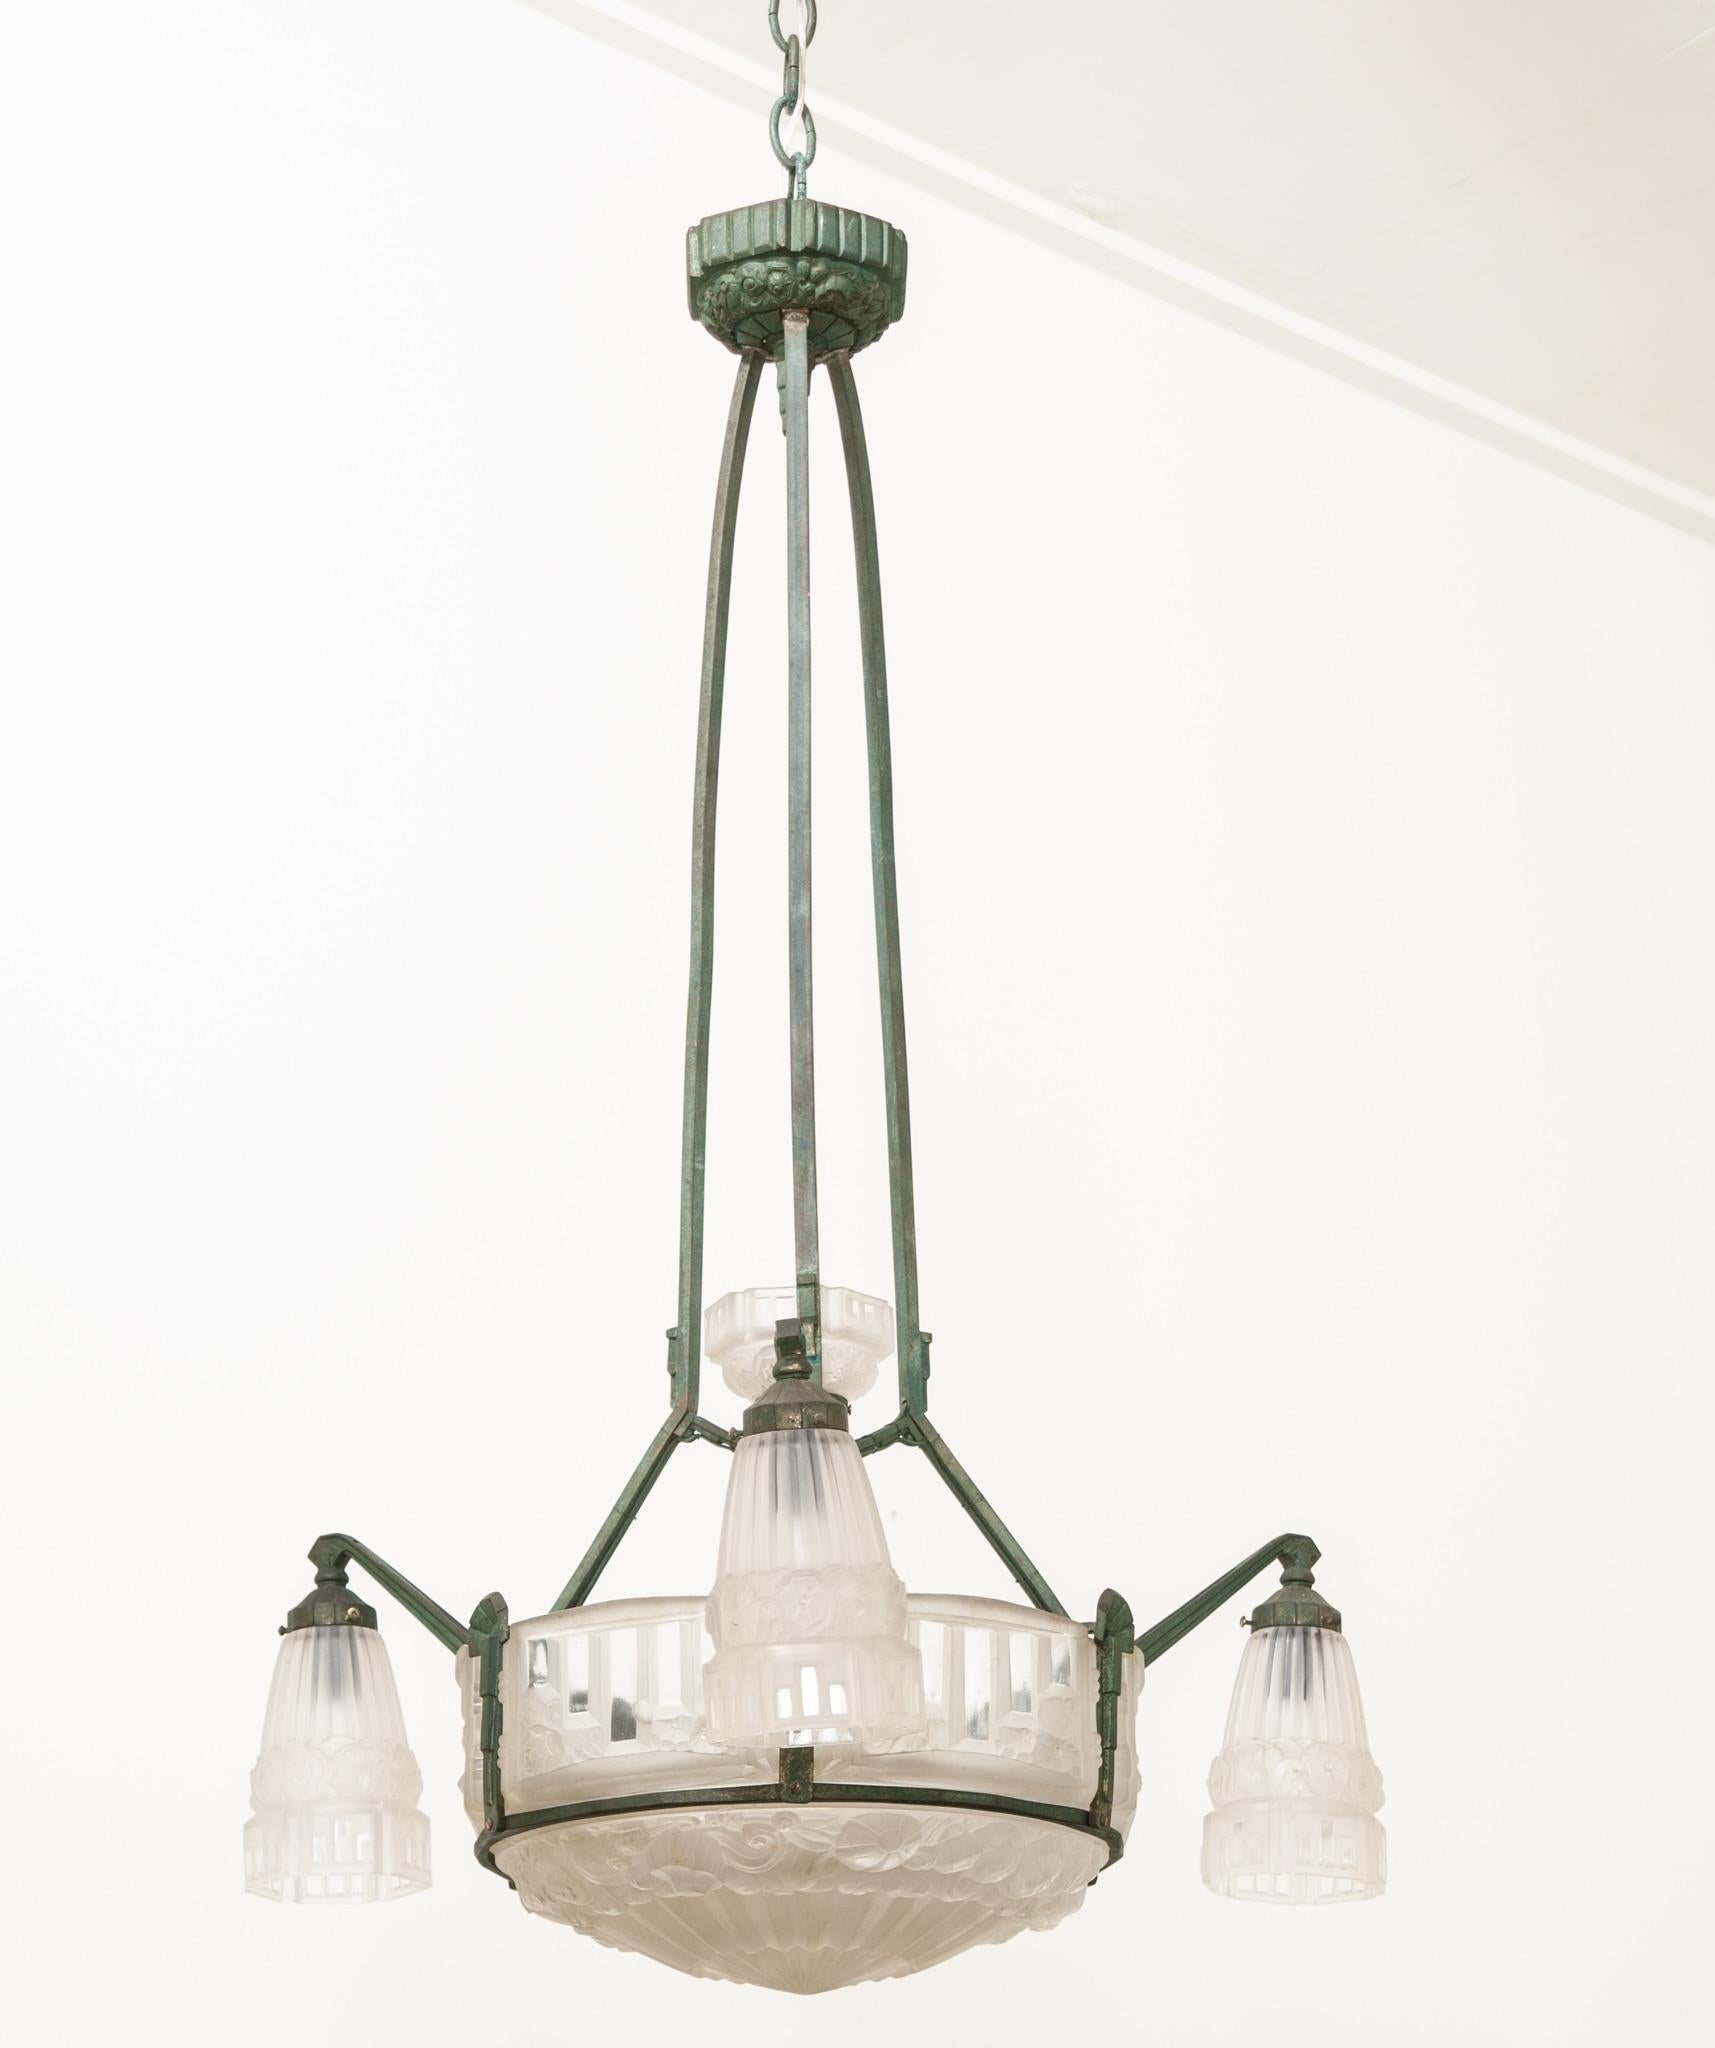 This exquisite Art Deco chandelier was hand-crafted in France during that artful period between 1925 and the end of the 1930s. Made of clear frosted molded glass and adorned with curvilinear and geometric skyscraper detailing and intricate molded